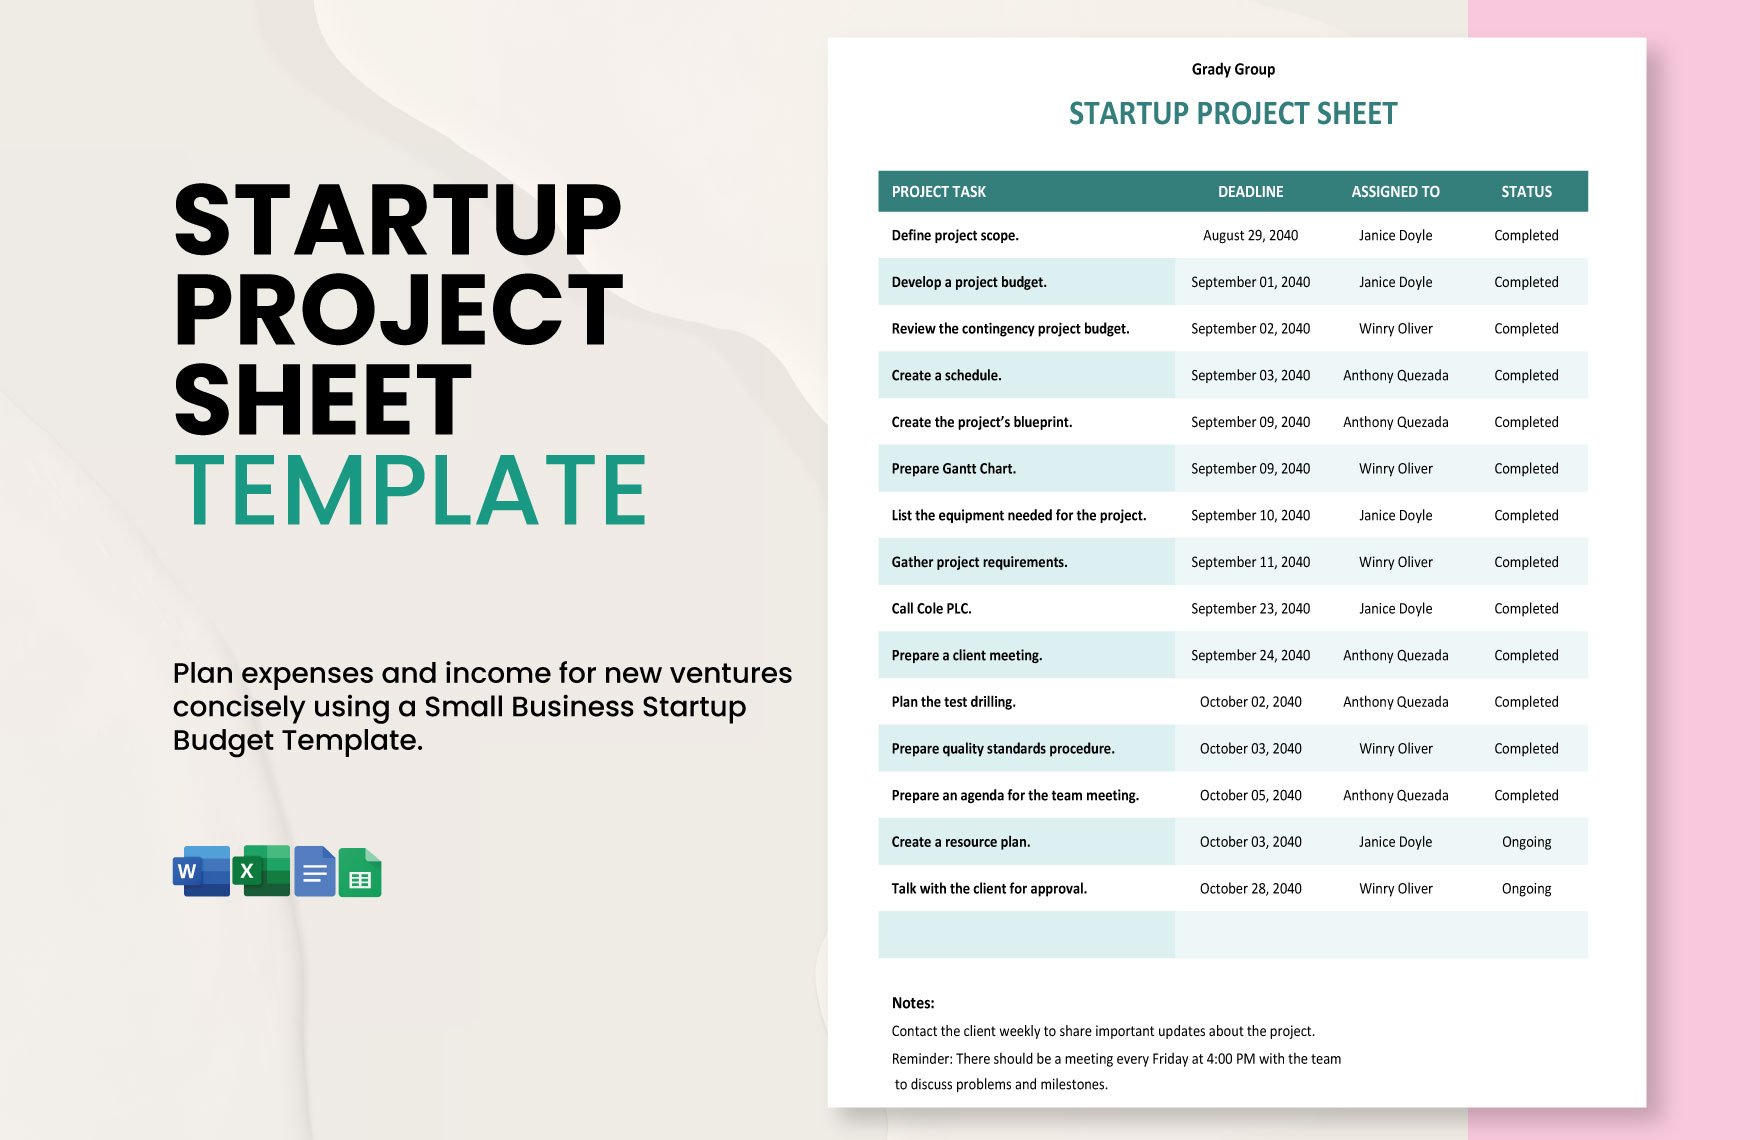 Startup Project Sheet Template in Word, Google Docs, Excel, Google Sheets